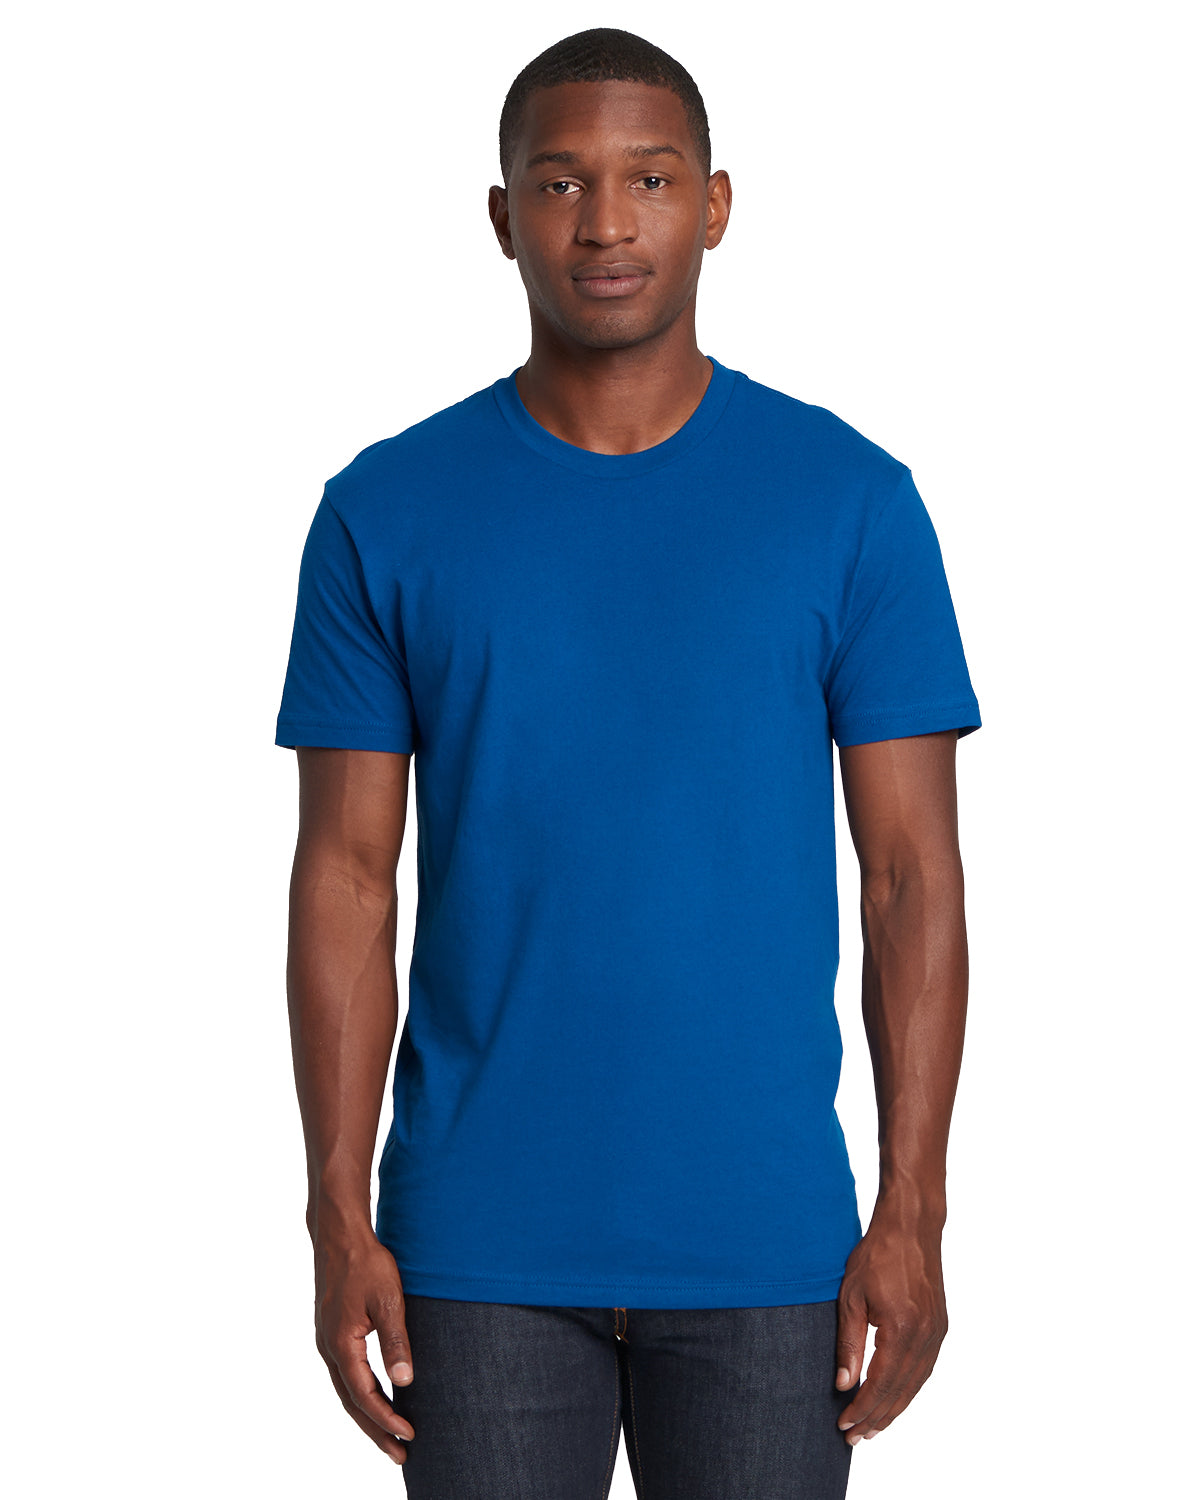 model wearing next level unisex cotton tee in cool blue